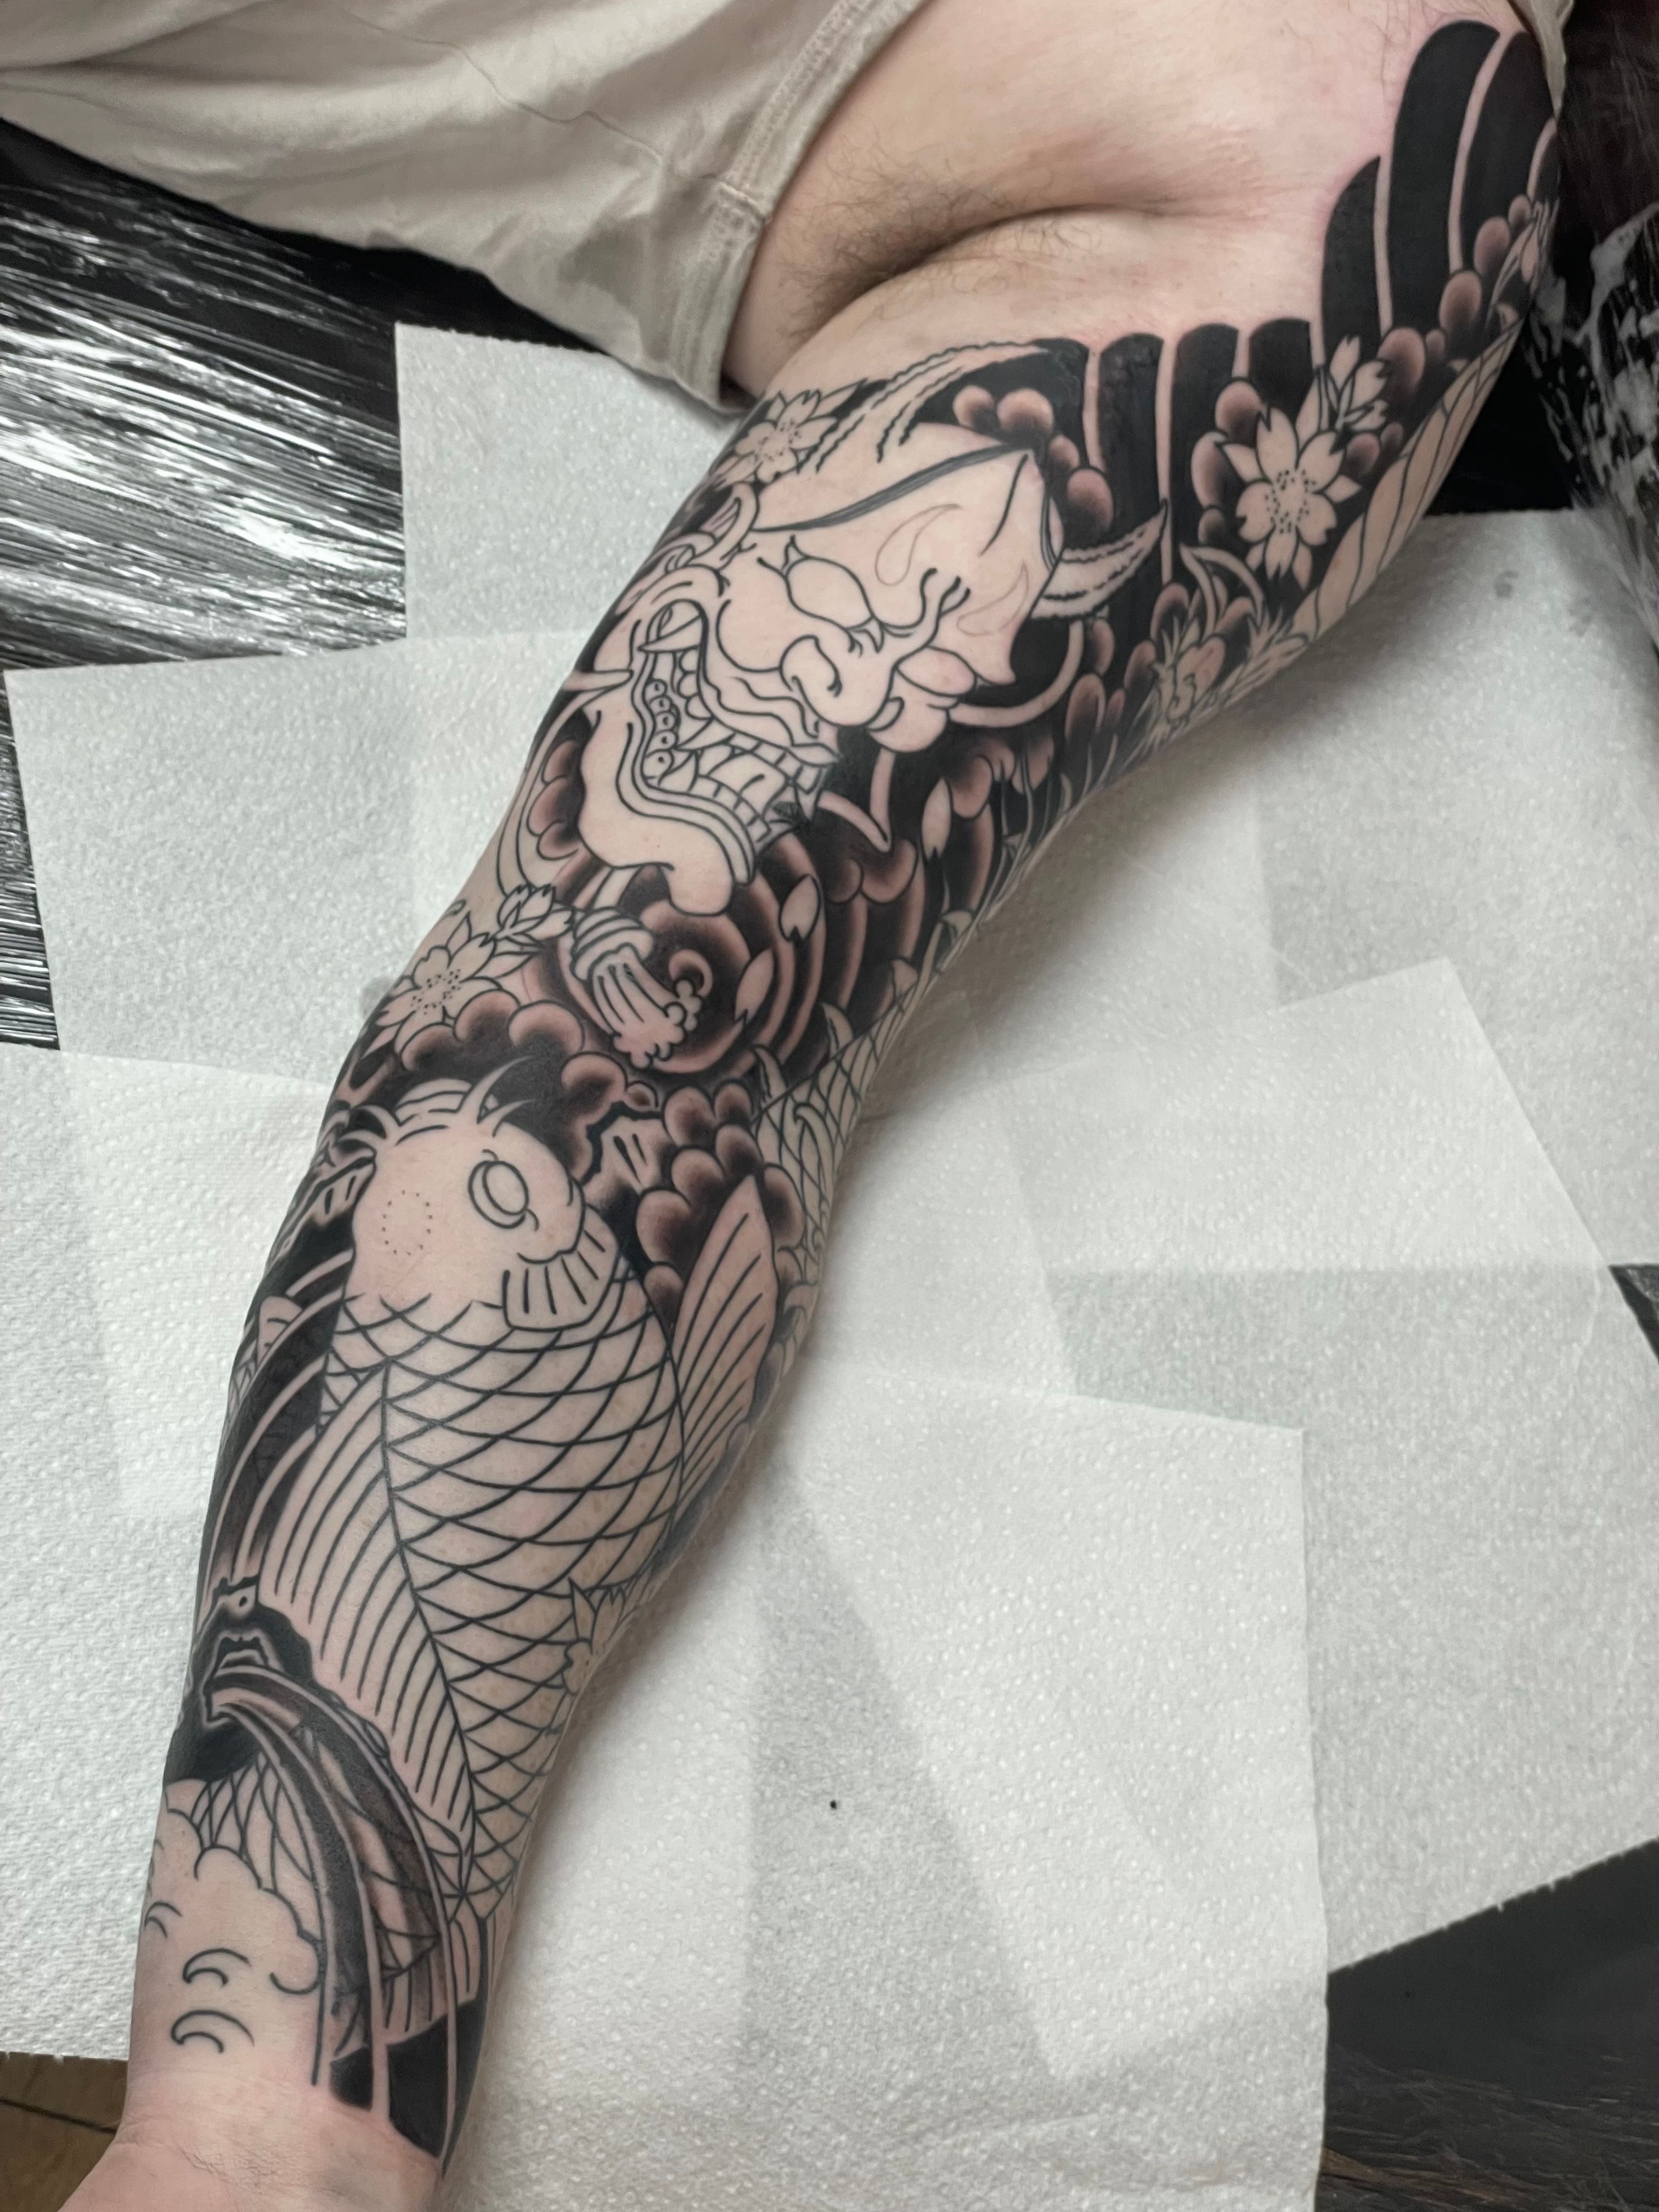 Black Fish Tattoo Parlour  Beautiful nautical themed half sleeve by our  senior artist bagoeshitamputih on Mike  Come and see us in our  clean and beautiful shop on Gili T We